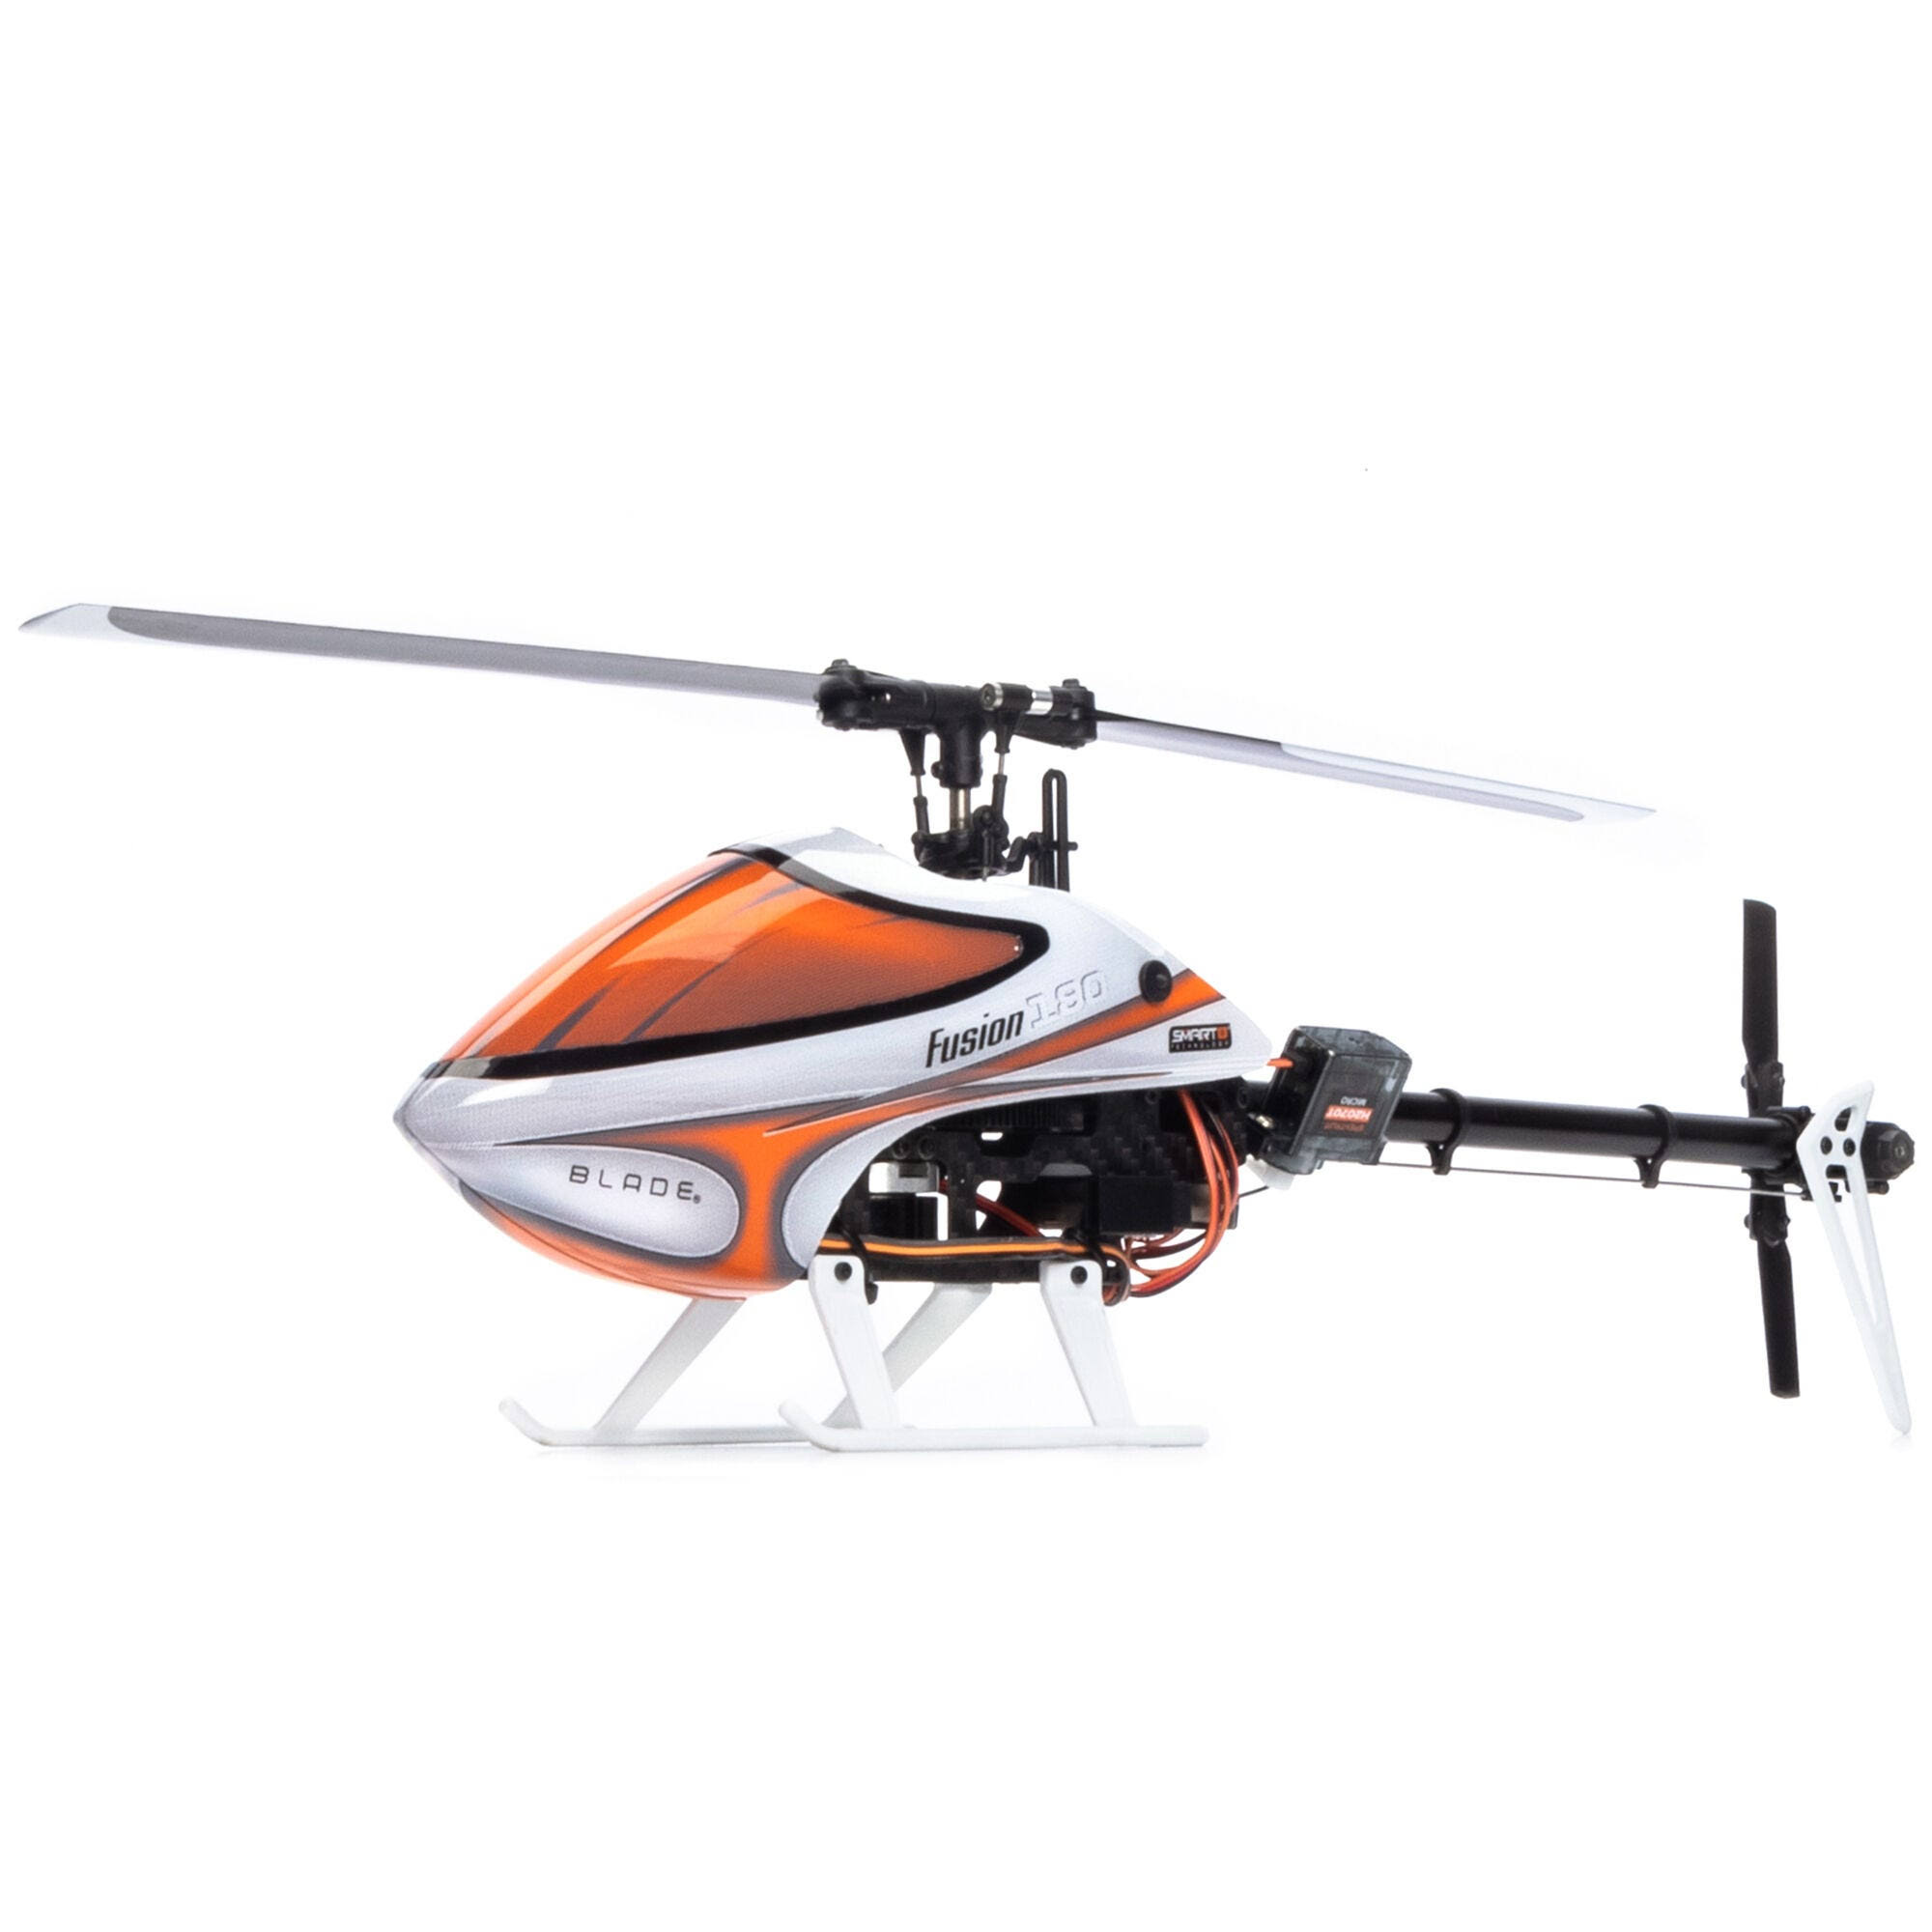 Blade Helicopter Fusion 180 Smart Bnf Basic / BLH05850